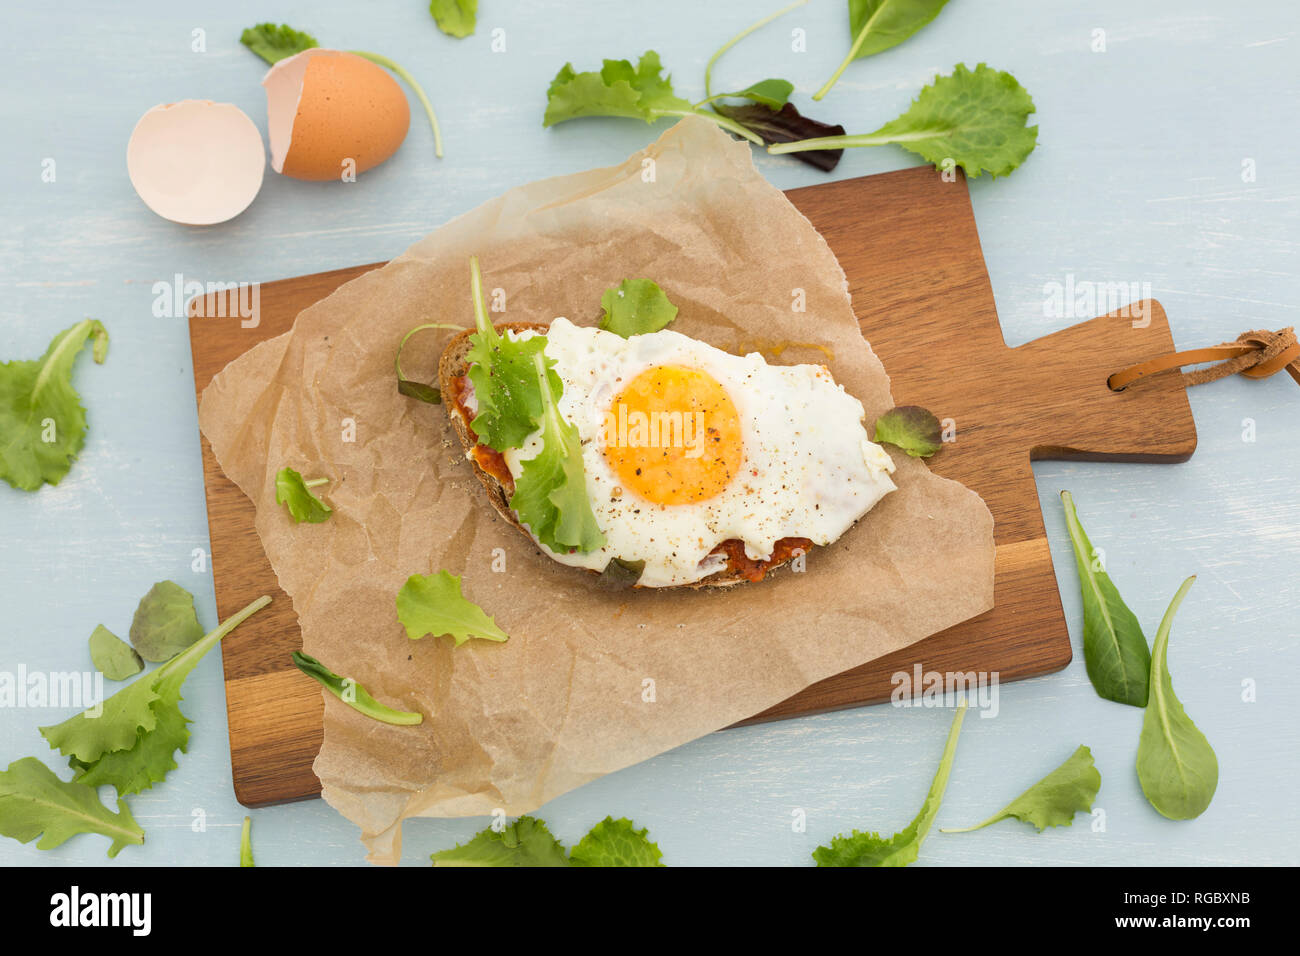 Fried egg on slice of brown bread coated with paprika cream Stock Photo